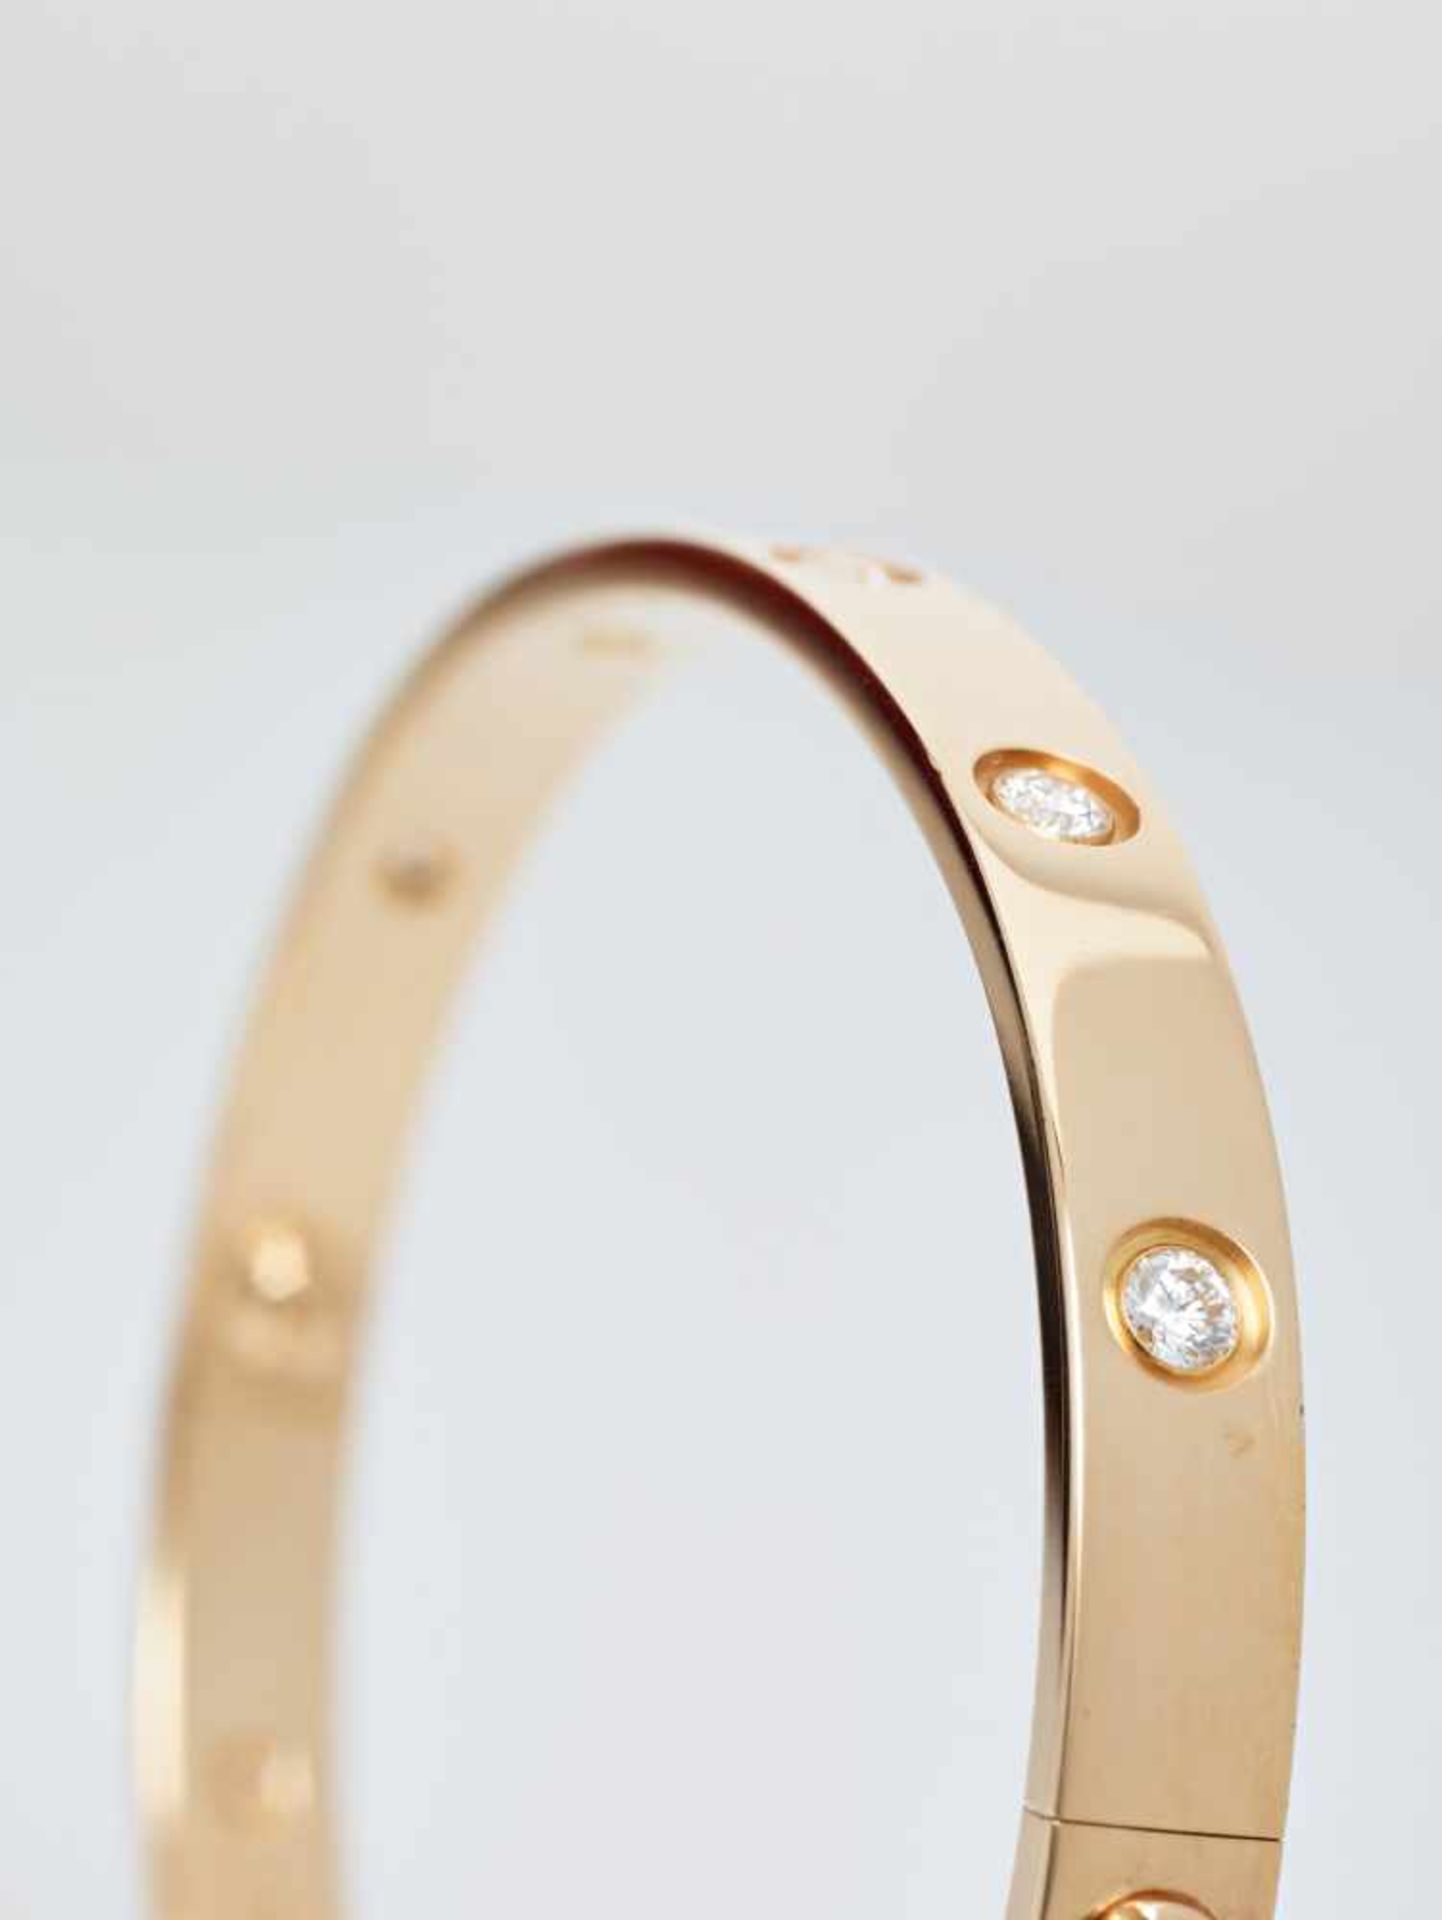 A CARTIER 18 CARAT GOLD ‘LOVE’ BANGLE WITH 1.2 CARATS OF DIAMONDSFrance2007, signed ‘Cartier’, - Image 6 of 9